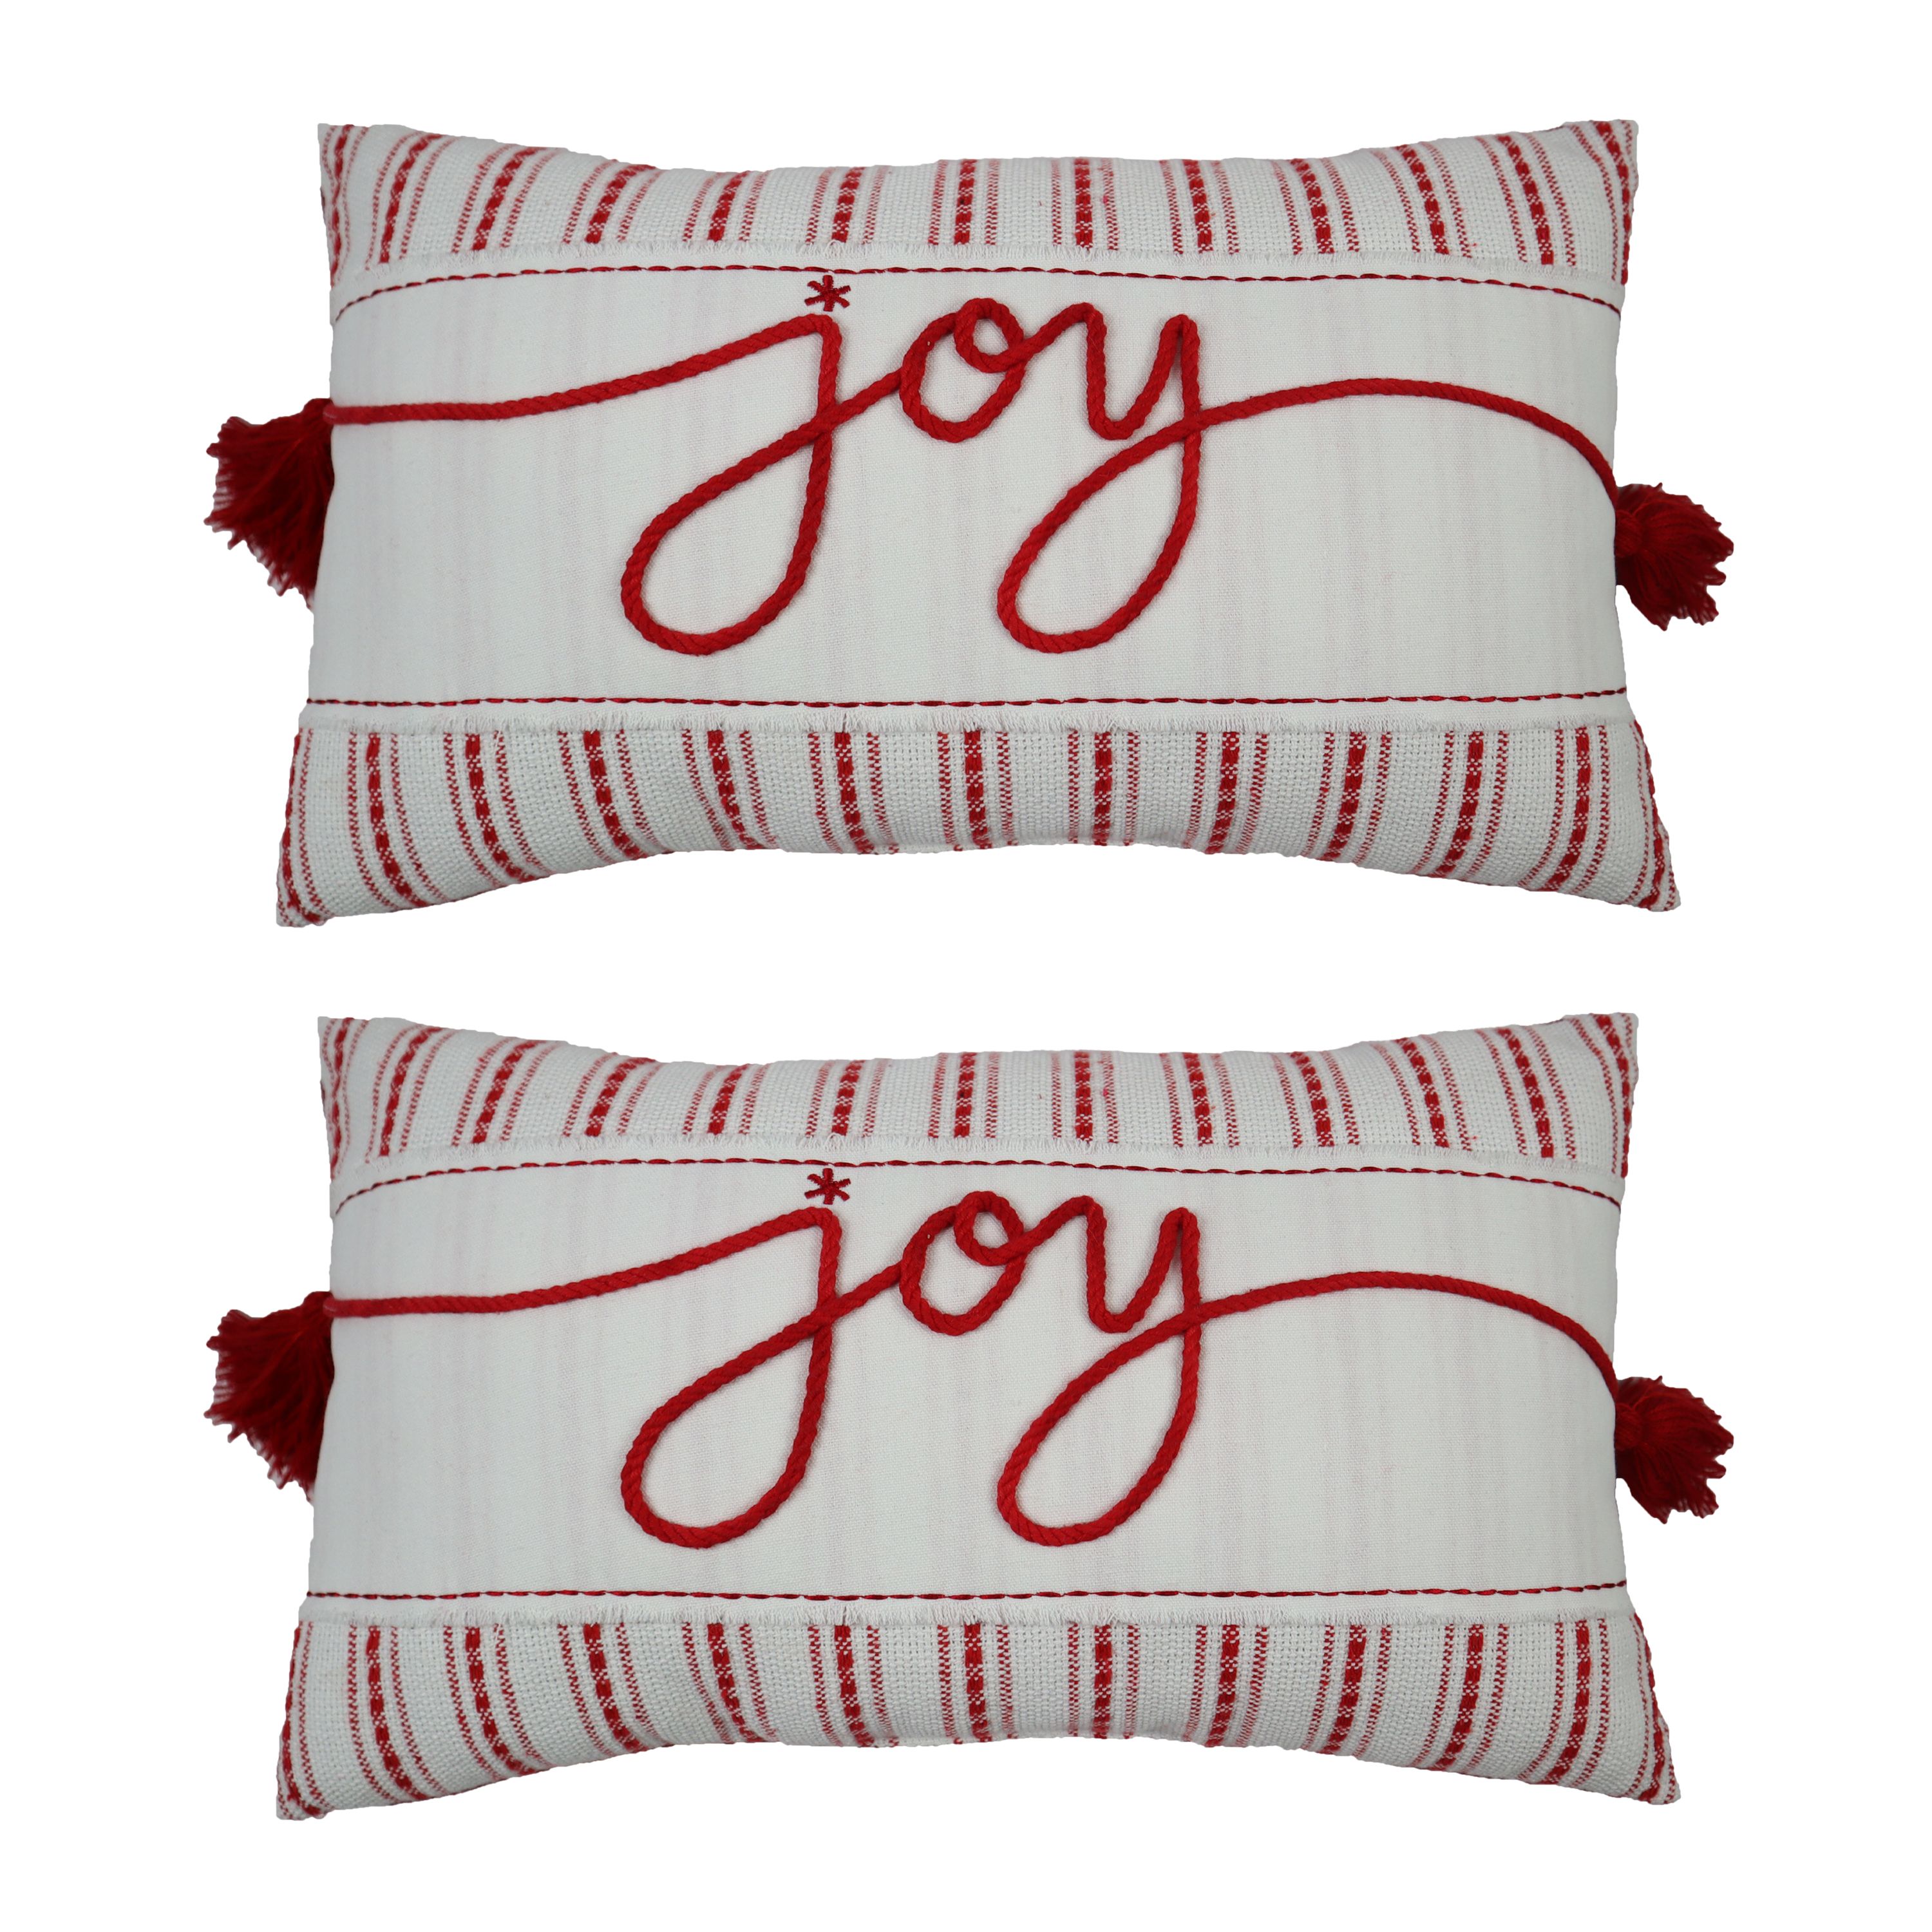 Holiday Time Joy Lumbar Christmas Decorative Pillows, 9x16inch, 2 Count Per Pack - image 1 of 6